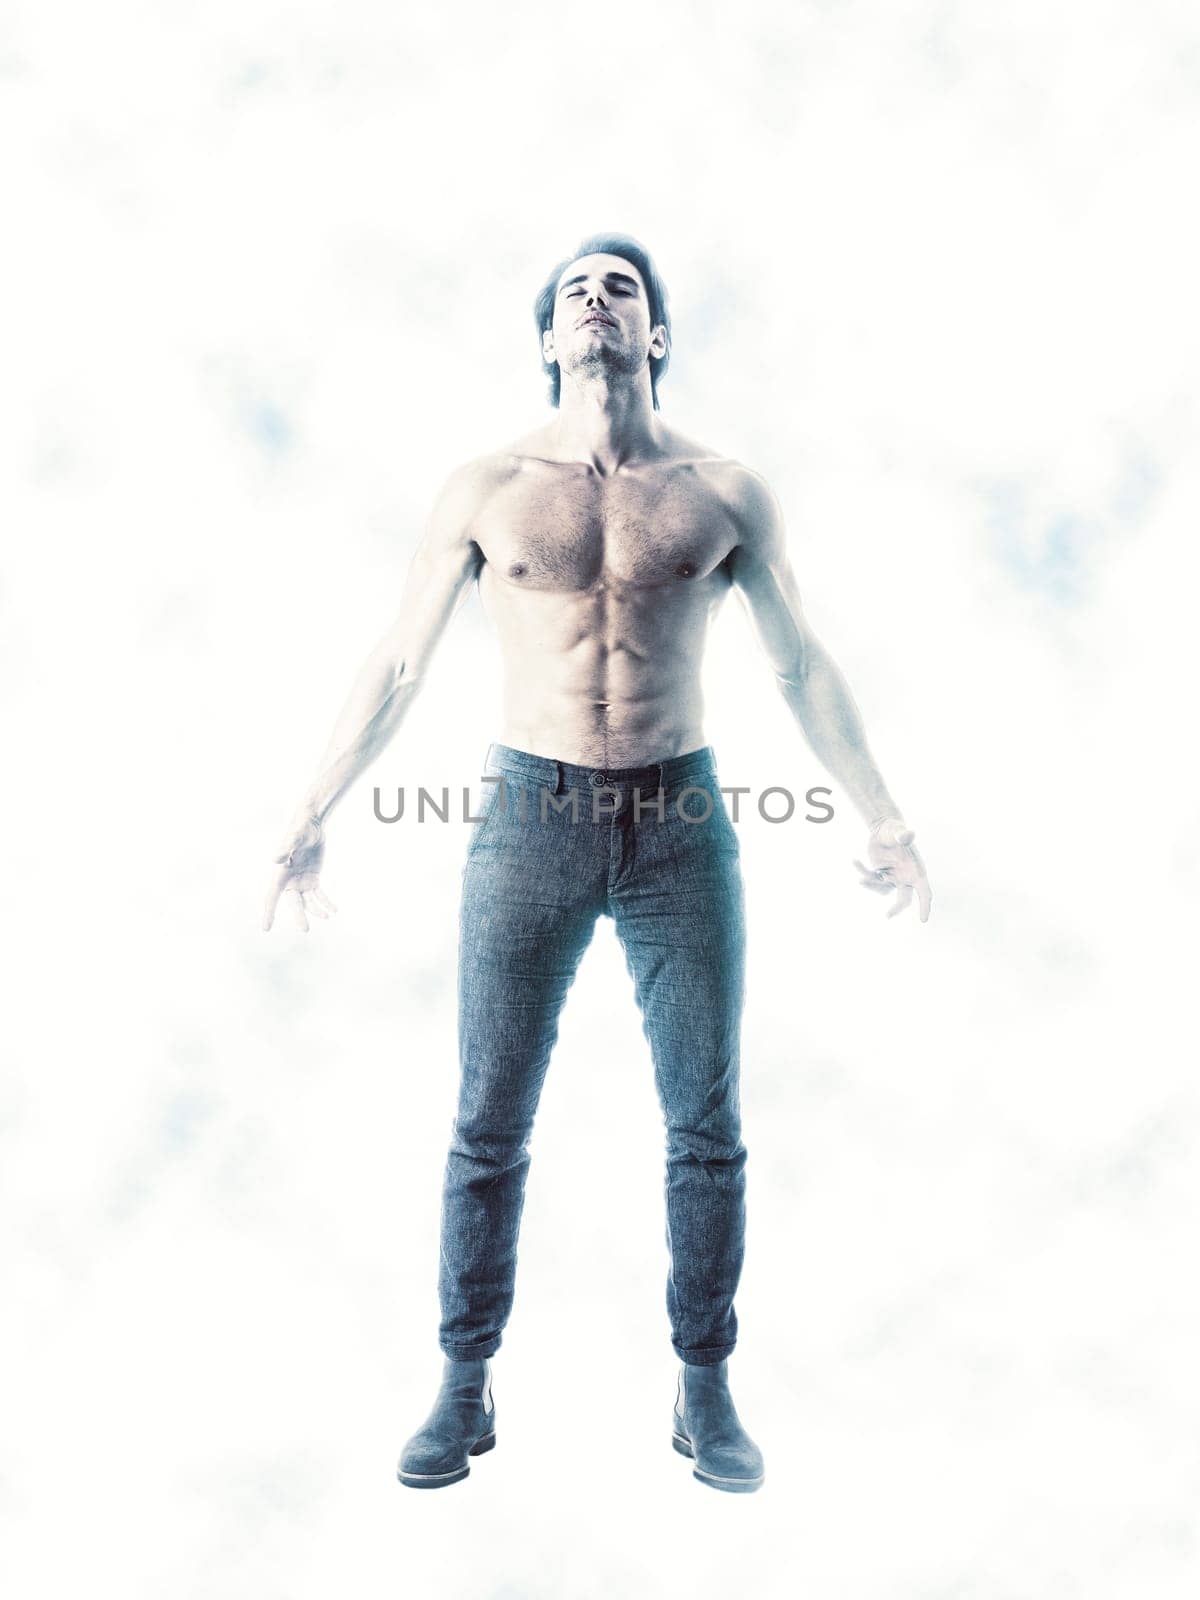 Photo of a shirtless man defying gravity in mid-air by artofphoto